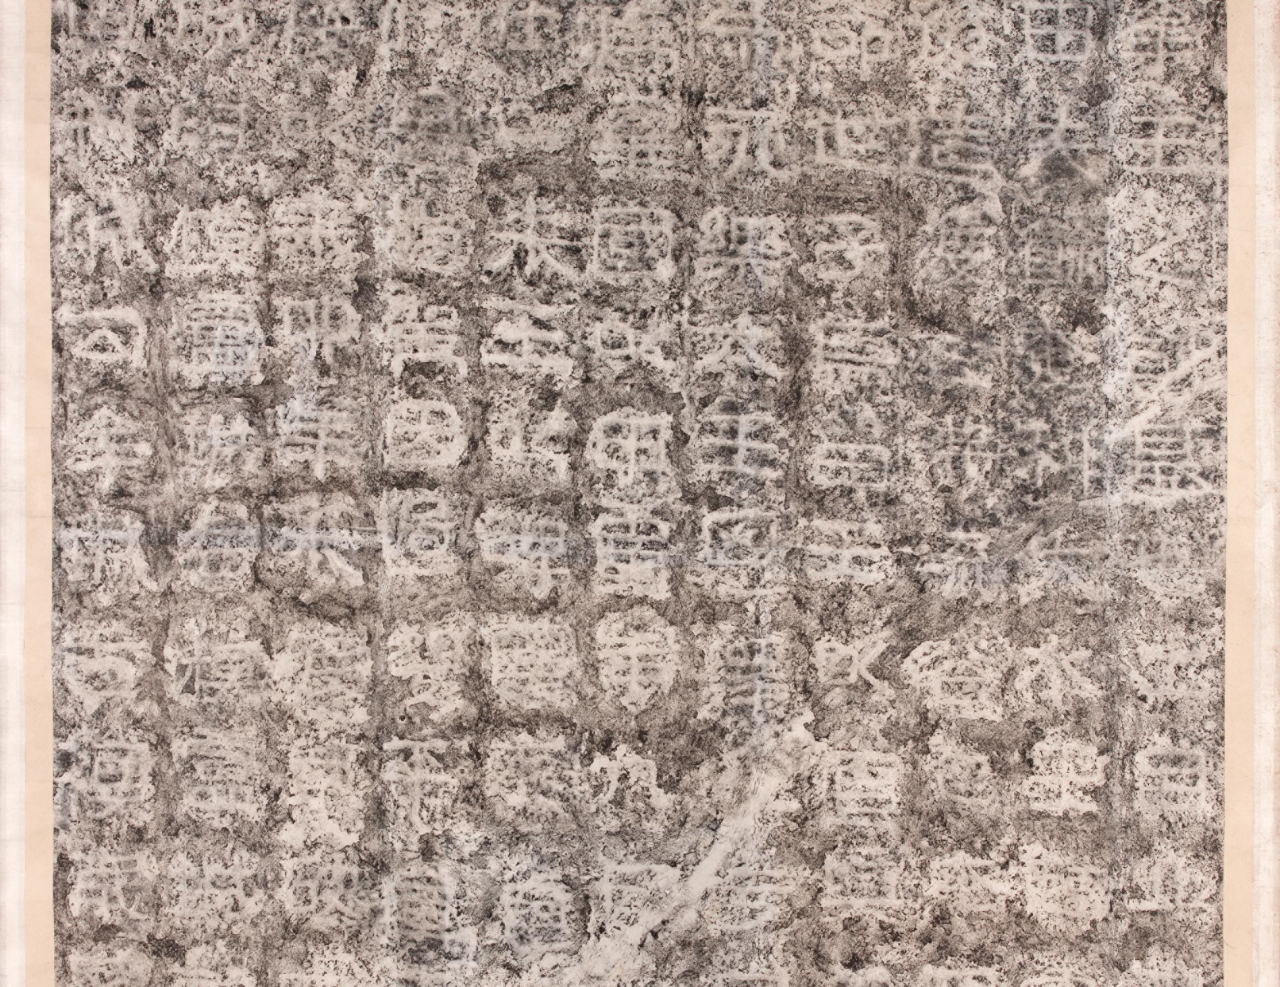 Rubbed copy of the epitaph on the monument for King Gwanggaeto at the National Museum of Korea (Yonhap)